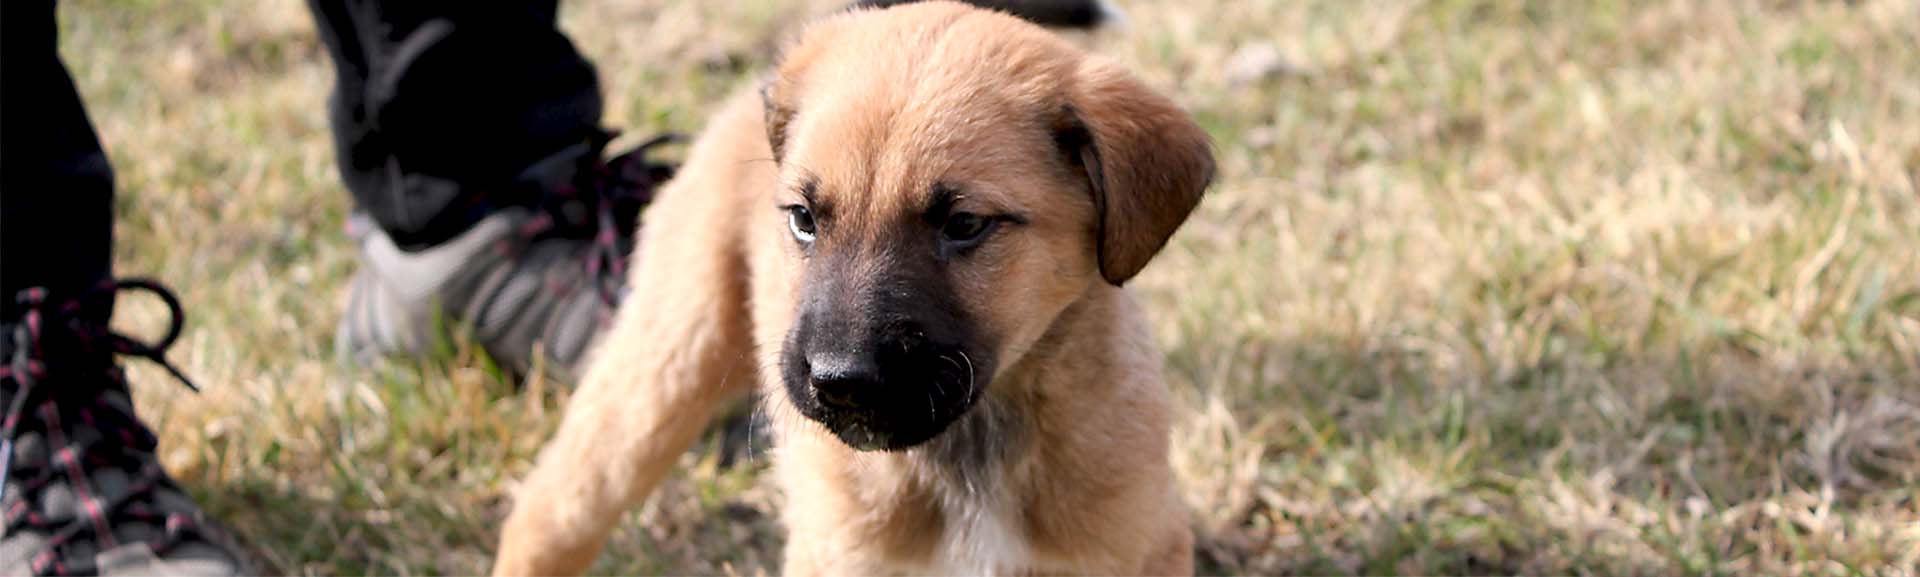 Working to secure safer lives for free-roaming dogs in Georgia